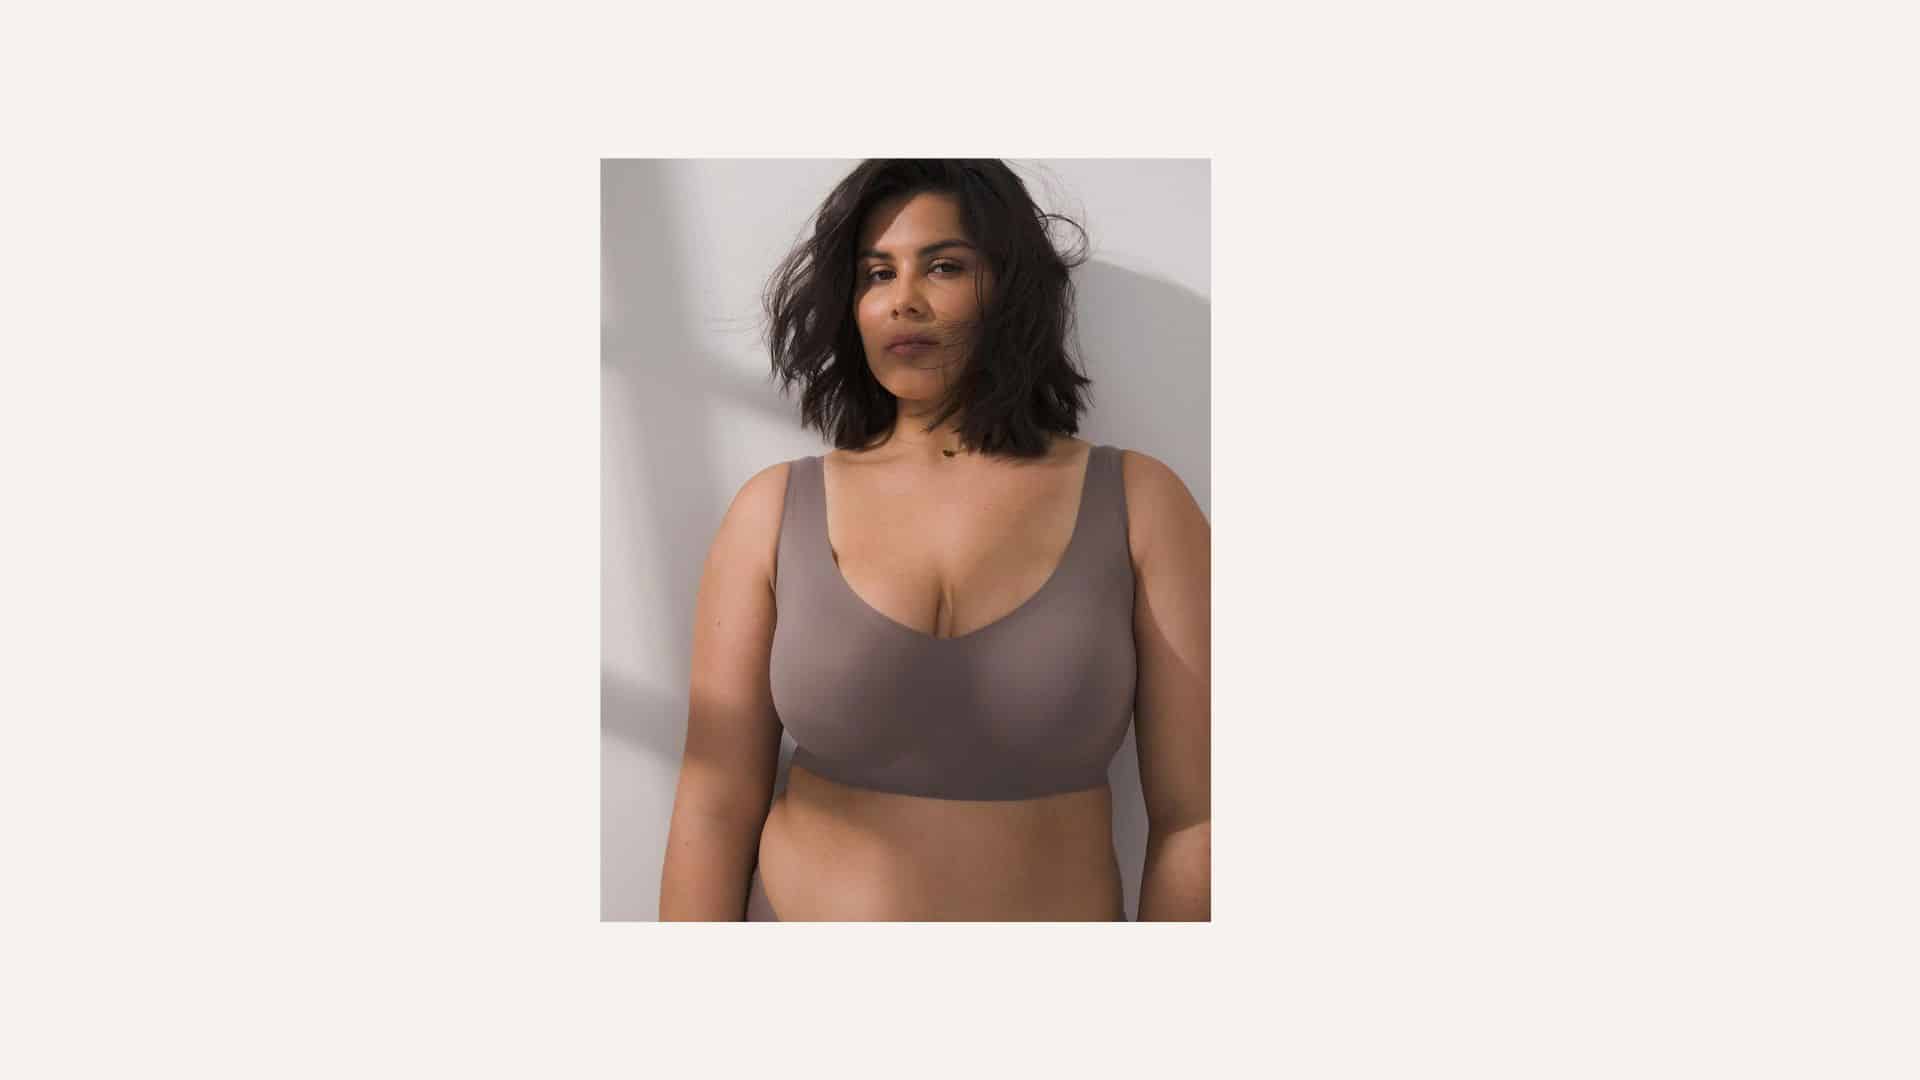 Hate bras? Us too! Nuudii System is the option between bra and